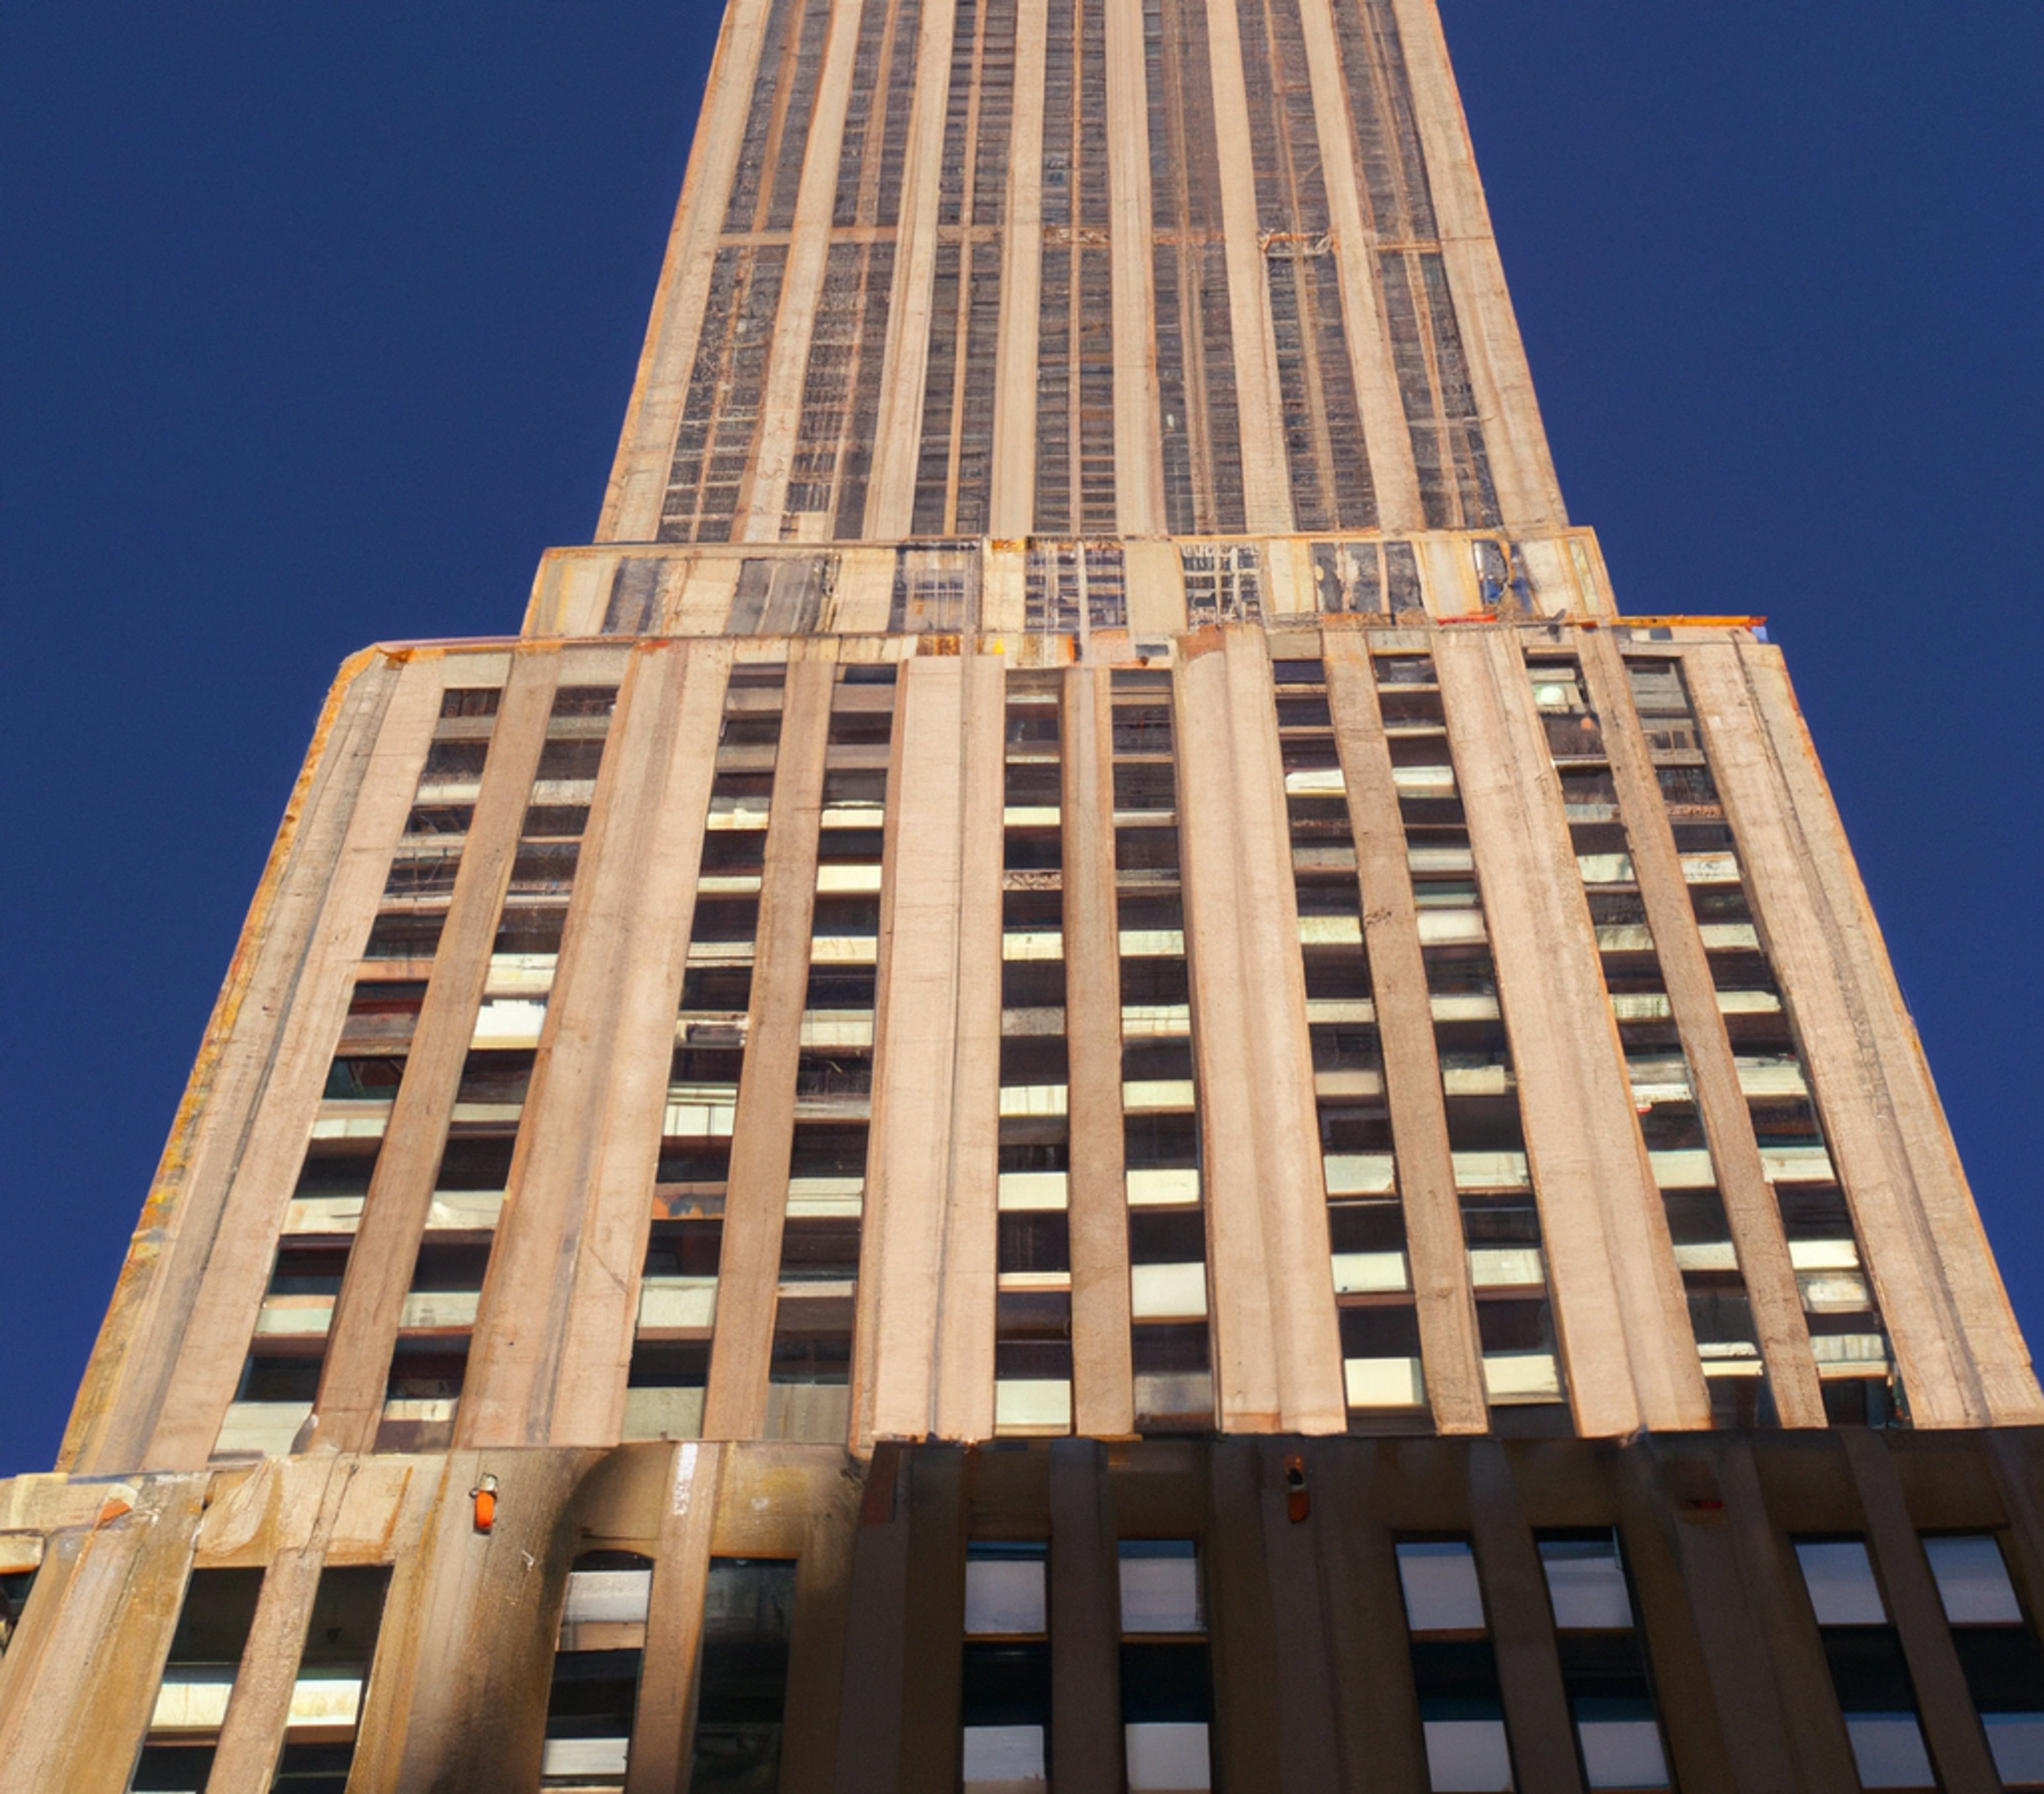 How Tall Is The Empire State Building: A Skyward Journey through Its Height and Records